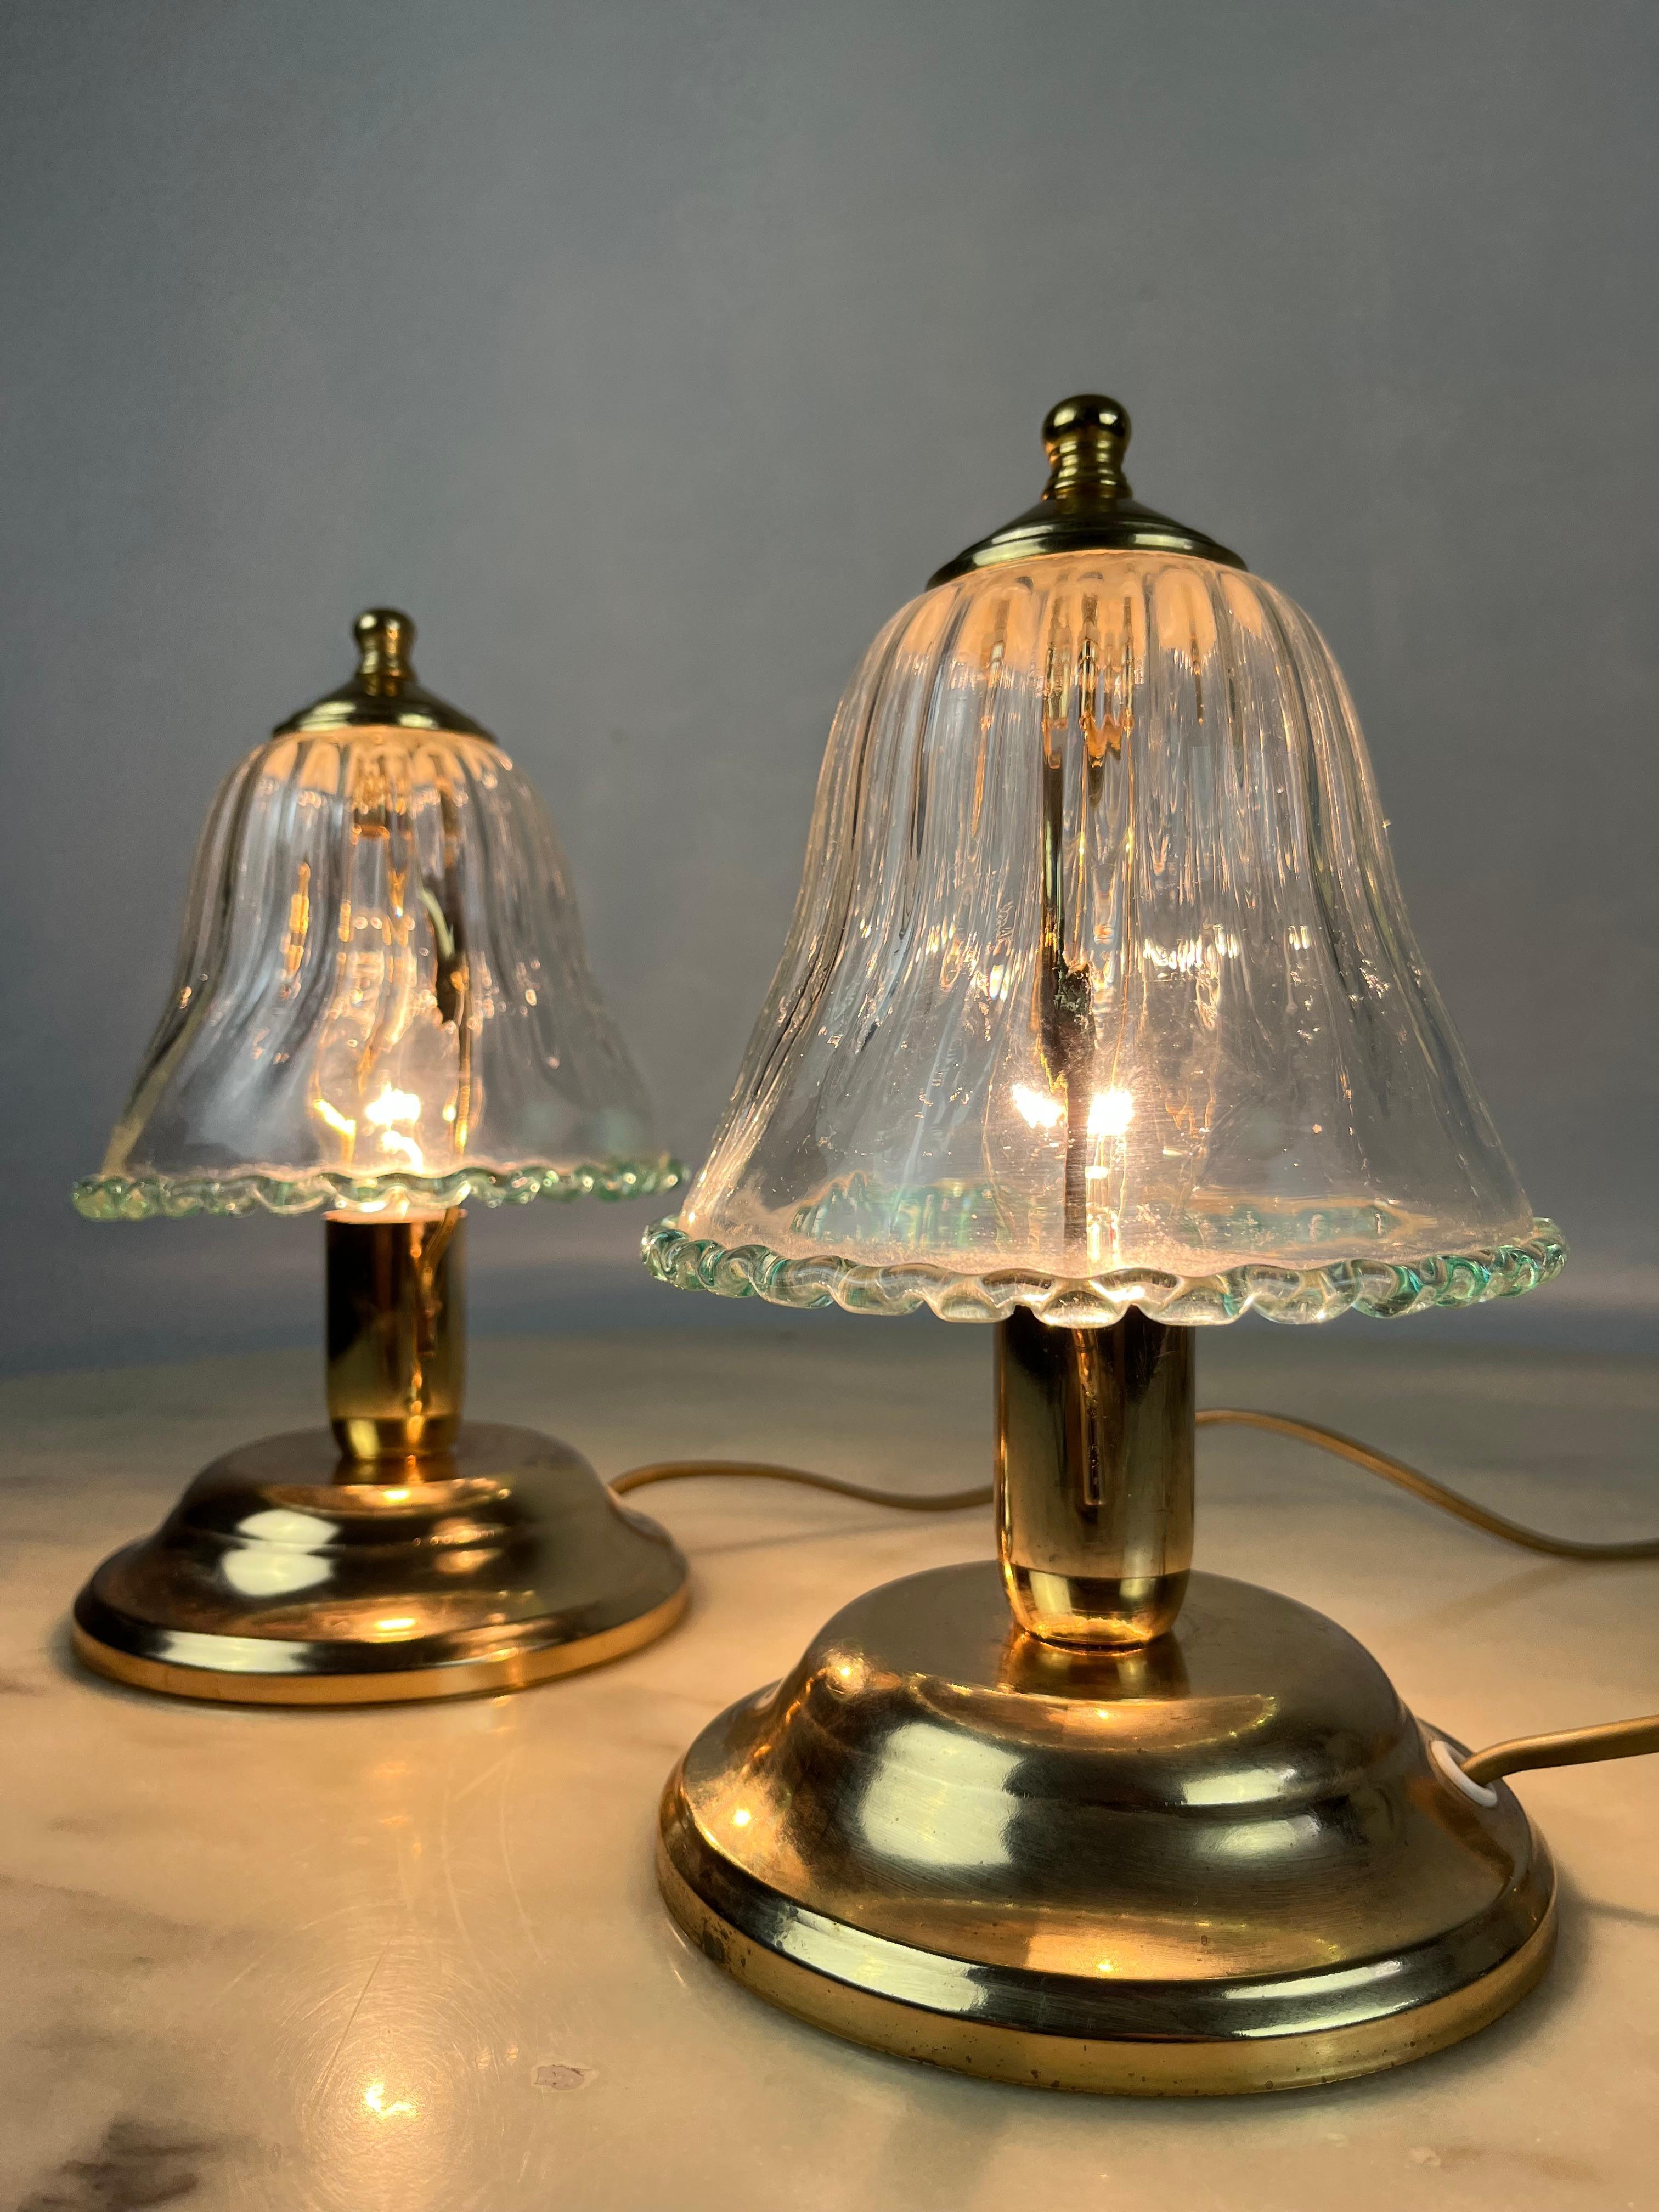 Pair of Murano glass bedside lamps, Italy, 1980s.
They have a structure in gilded metal. Intact and functioning.Small signs of time and use.